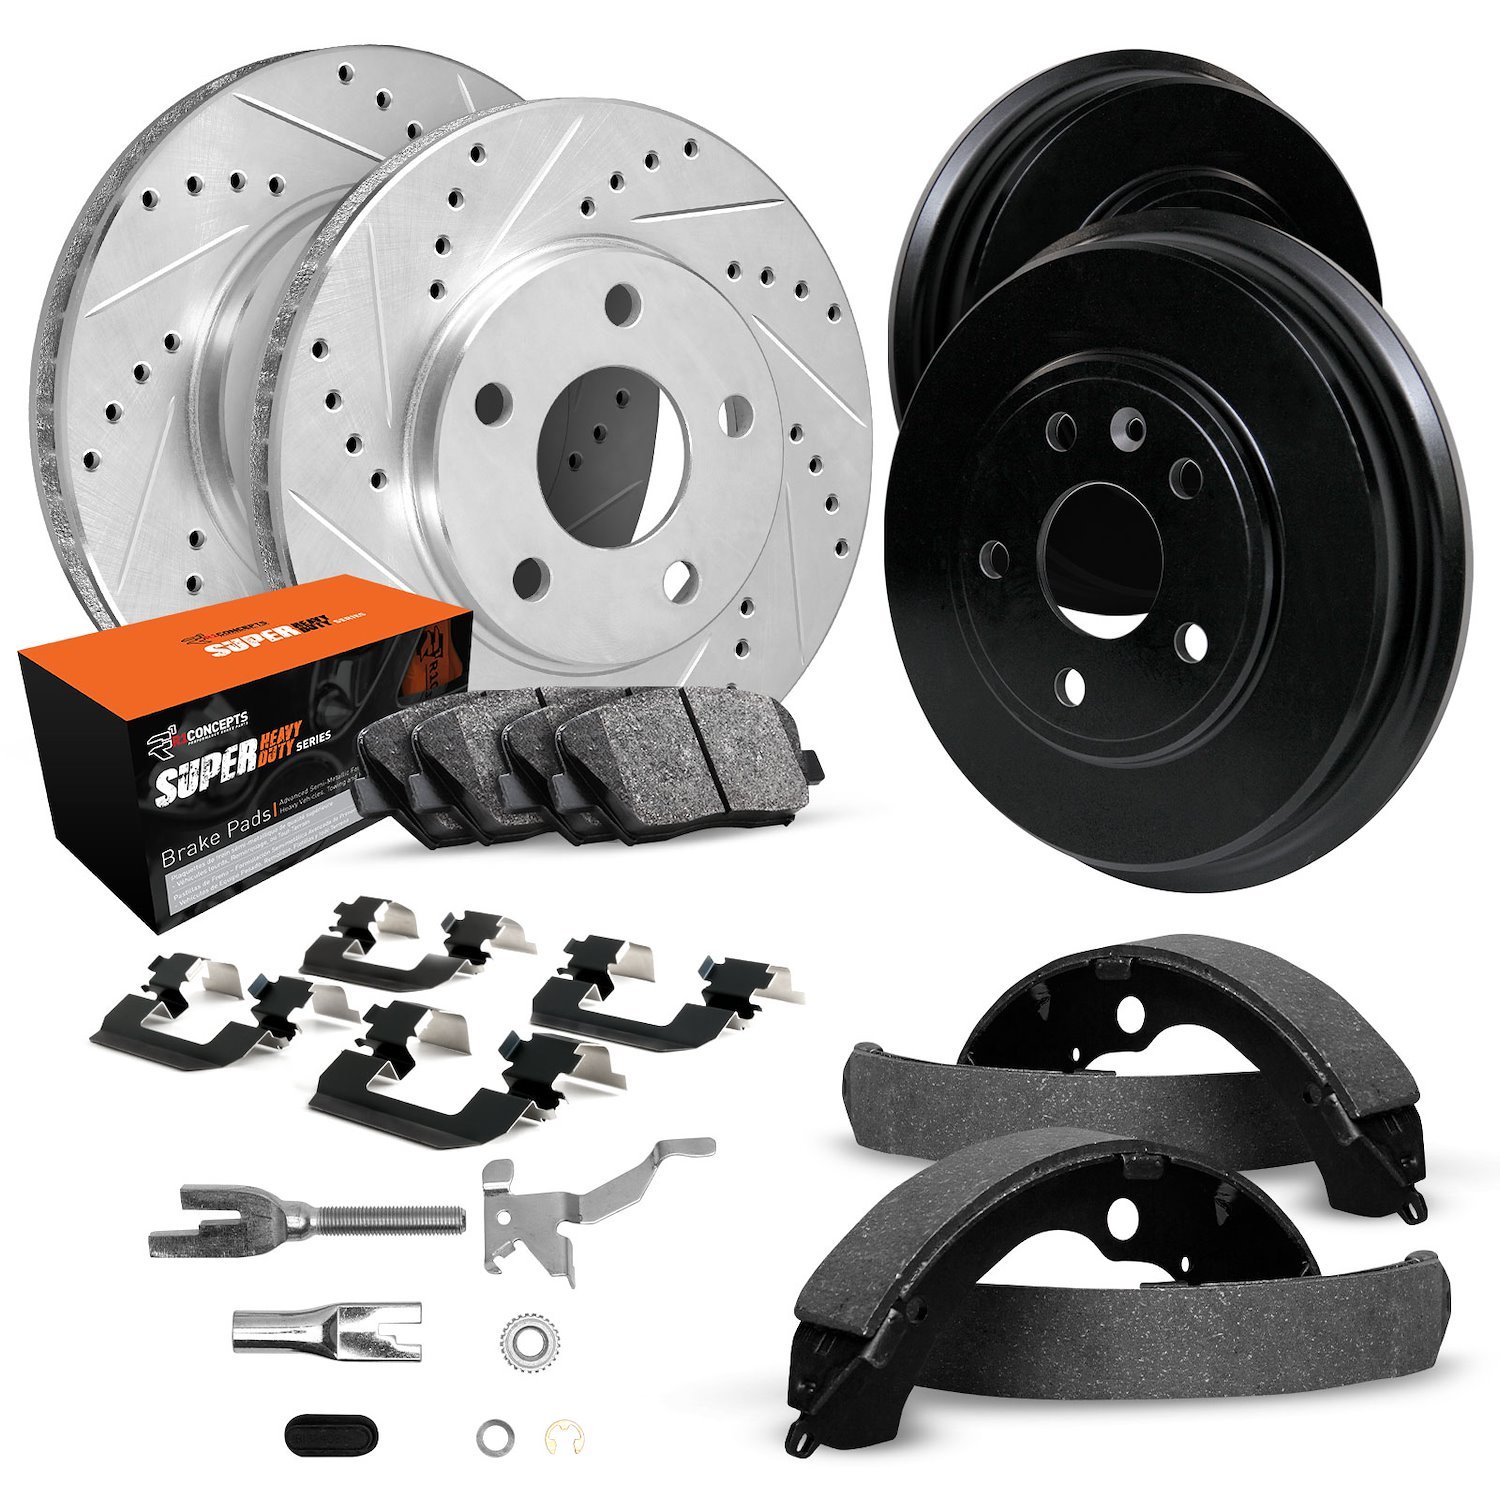 E-Line Drilled/Slotted Silver Rotor & Drum Set w/Super-Duty Pads, Shoes/Hardware/Adjusters, 1994-1997 Mopar